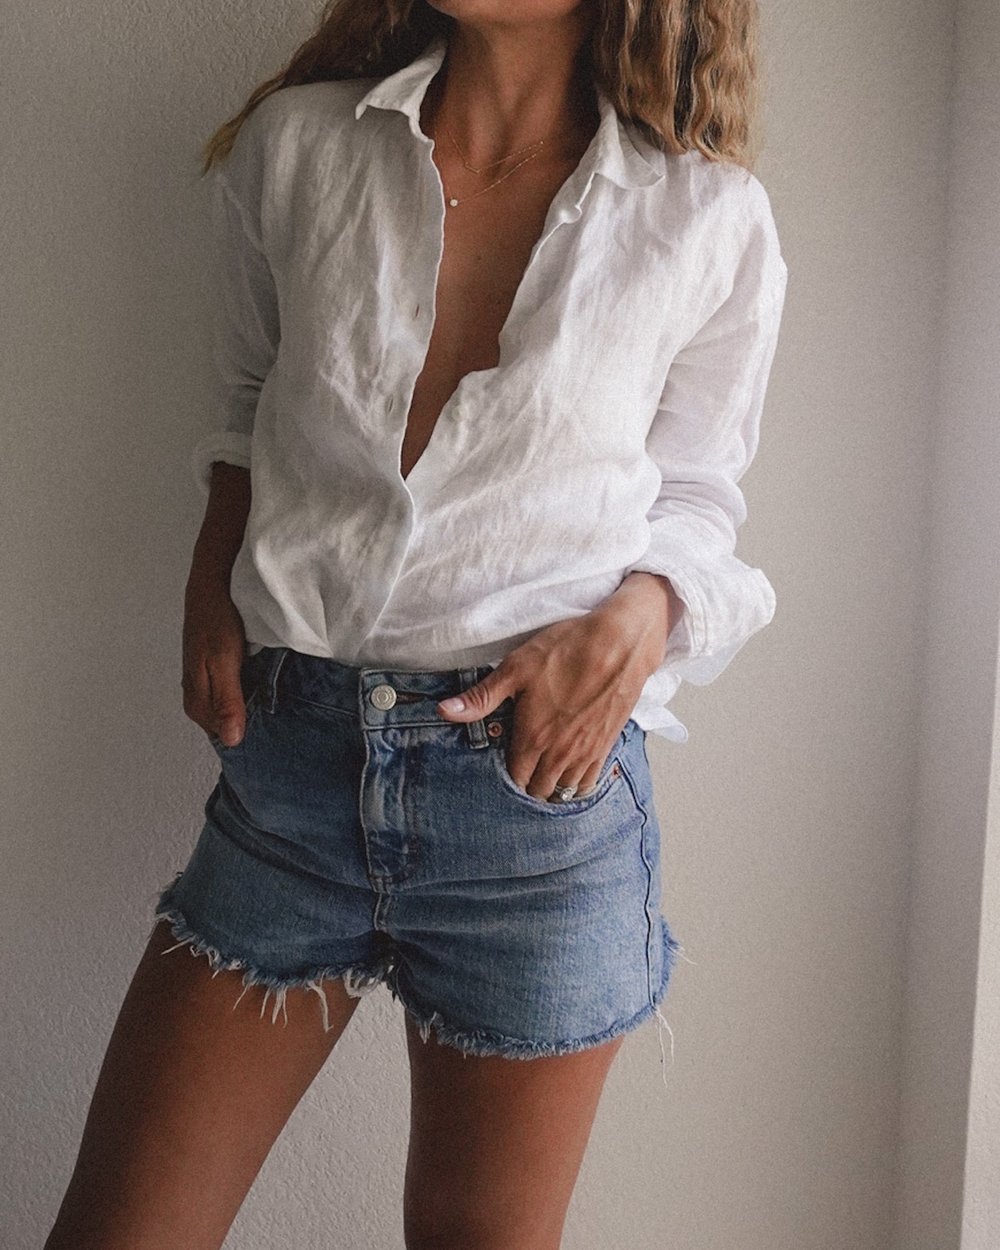  Jessica Ashley wearing Uniqlo linen blouse with TopShop denim shorts from Nordstrom | outfit details   